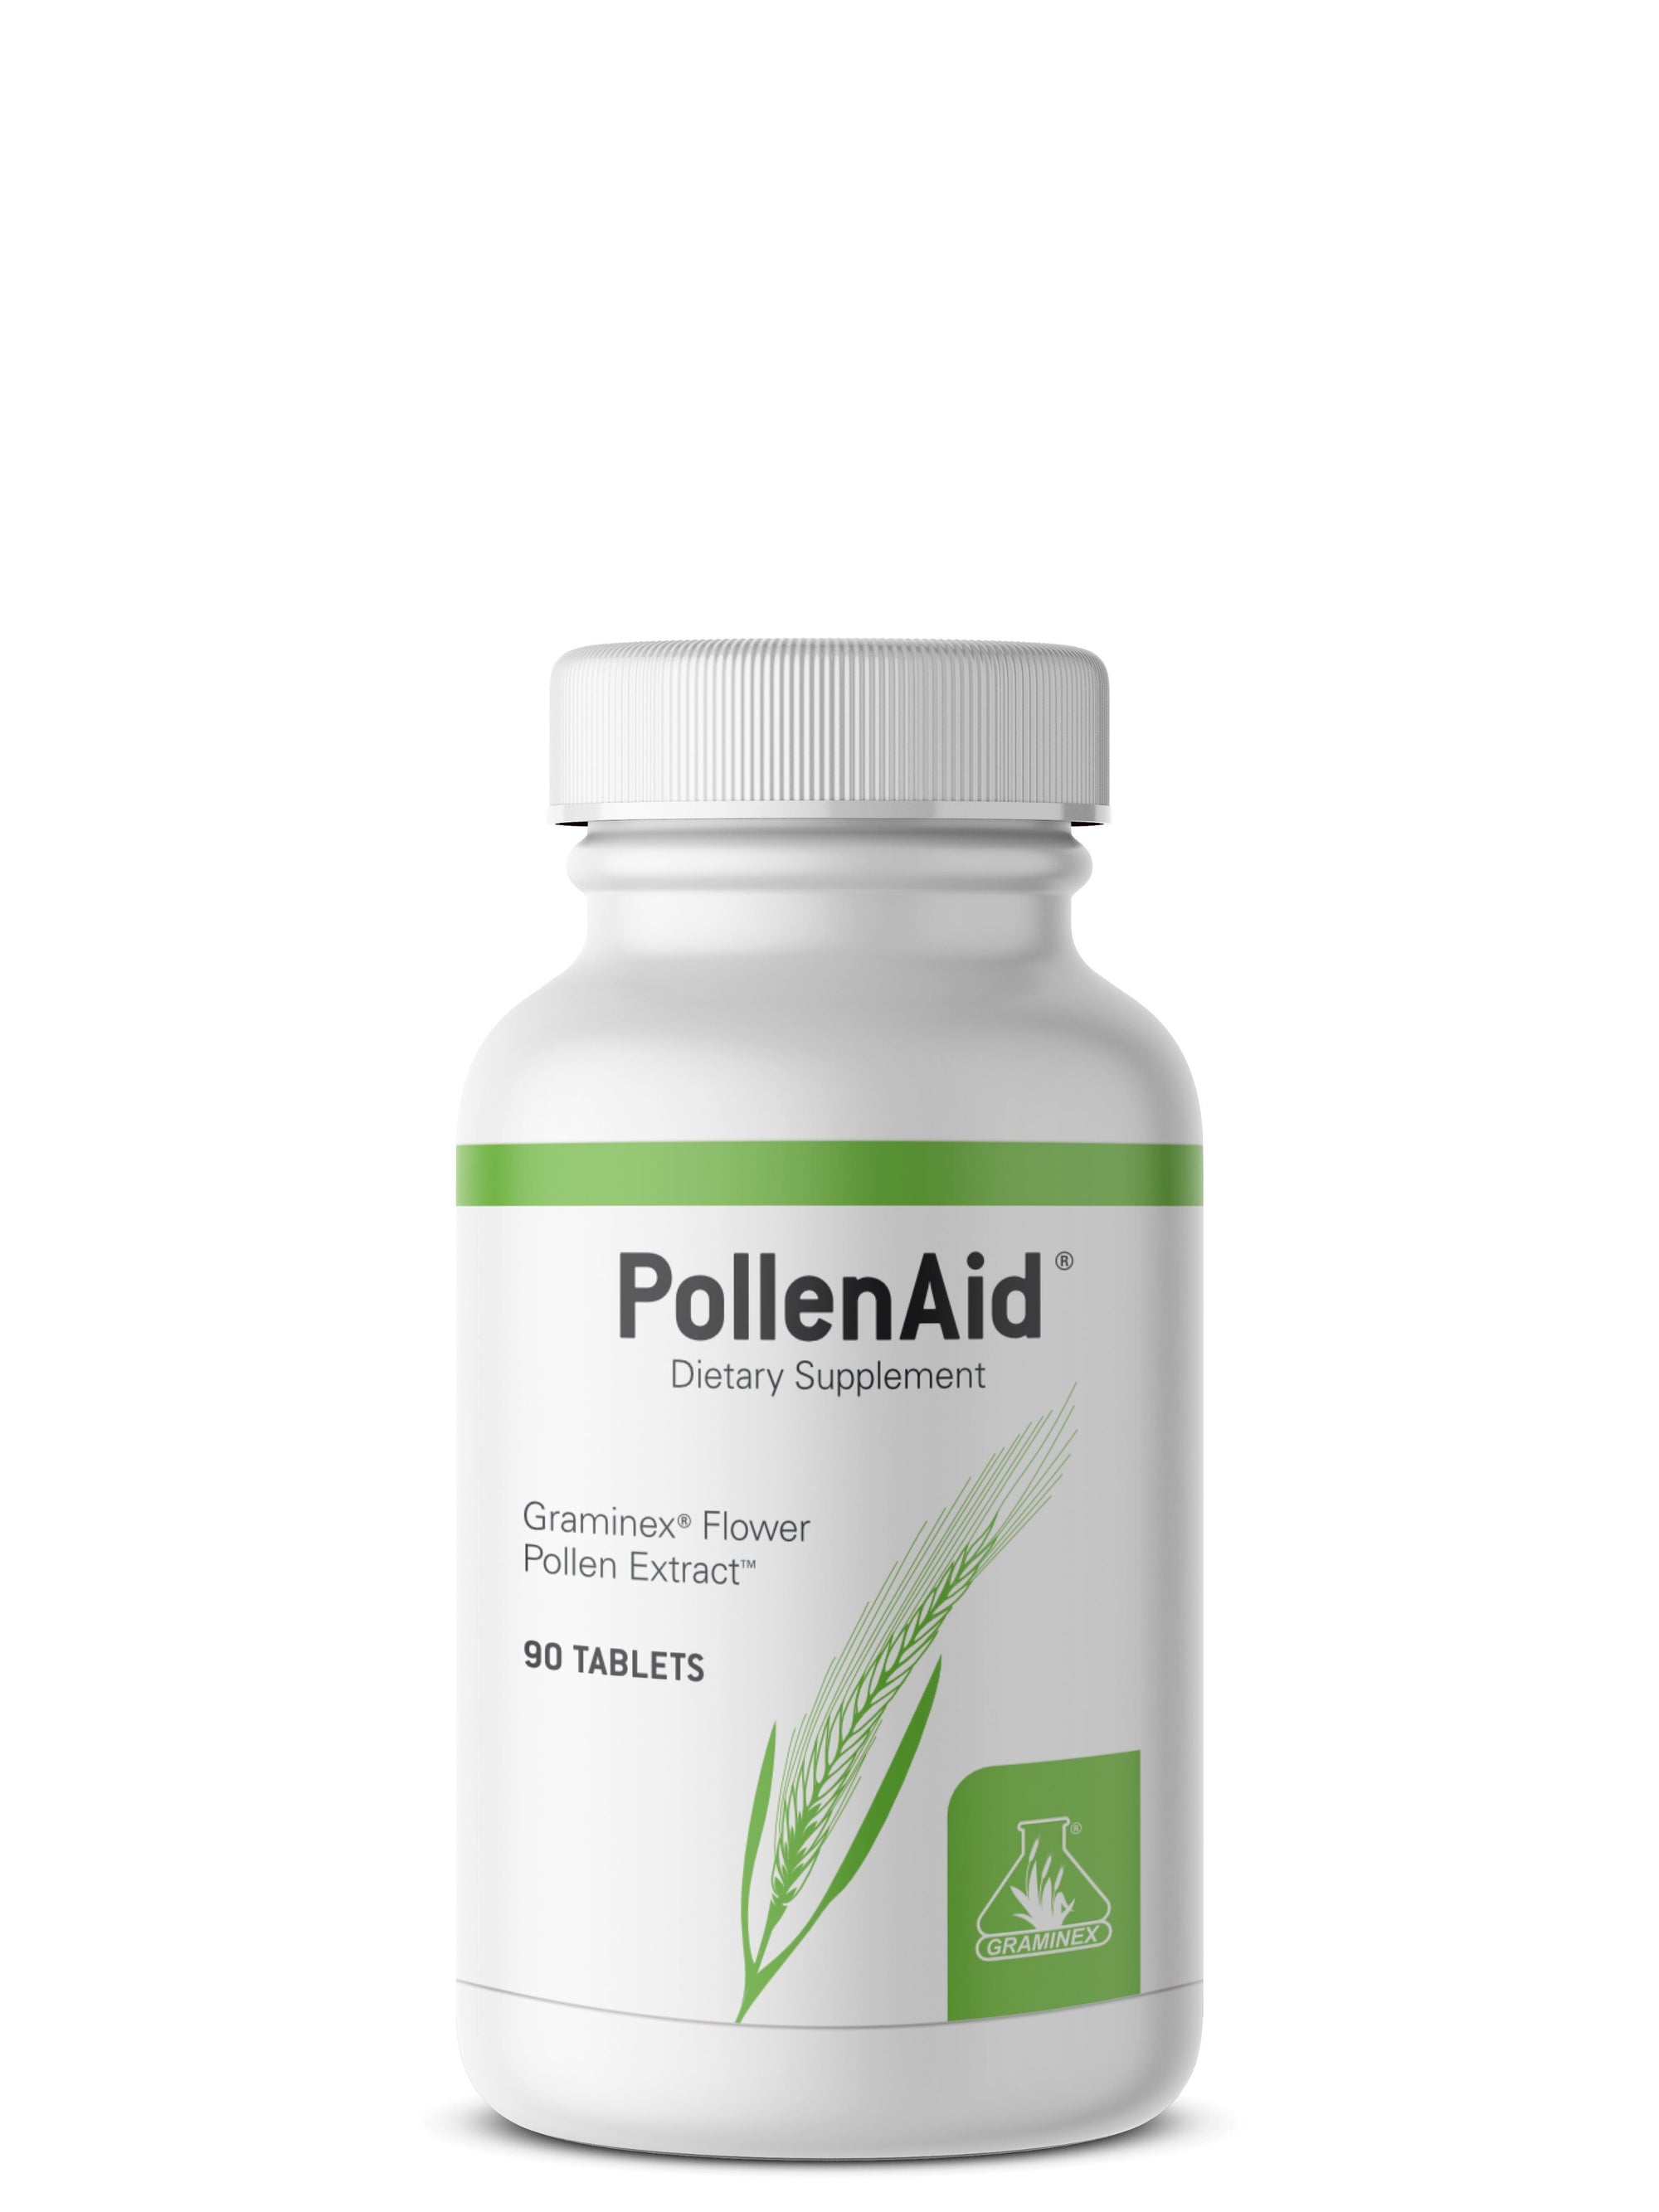 PollenAid Prostate Health Support | Helps Relieve Pain and Control Urinary Flow - 90 Tablets